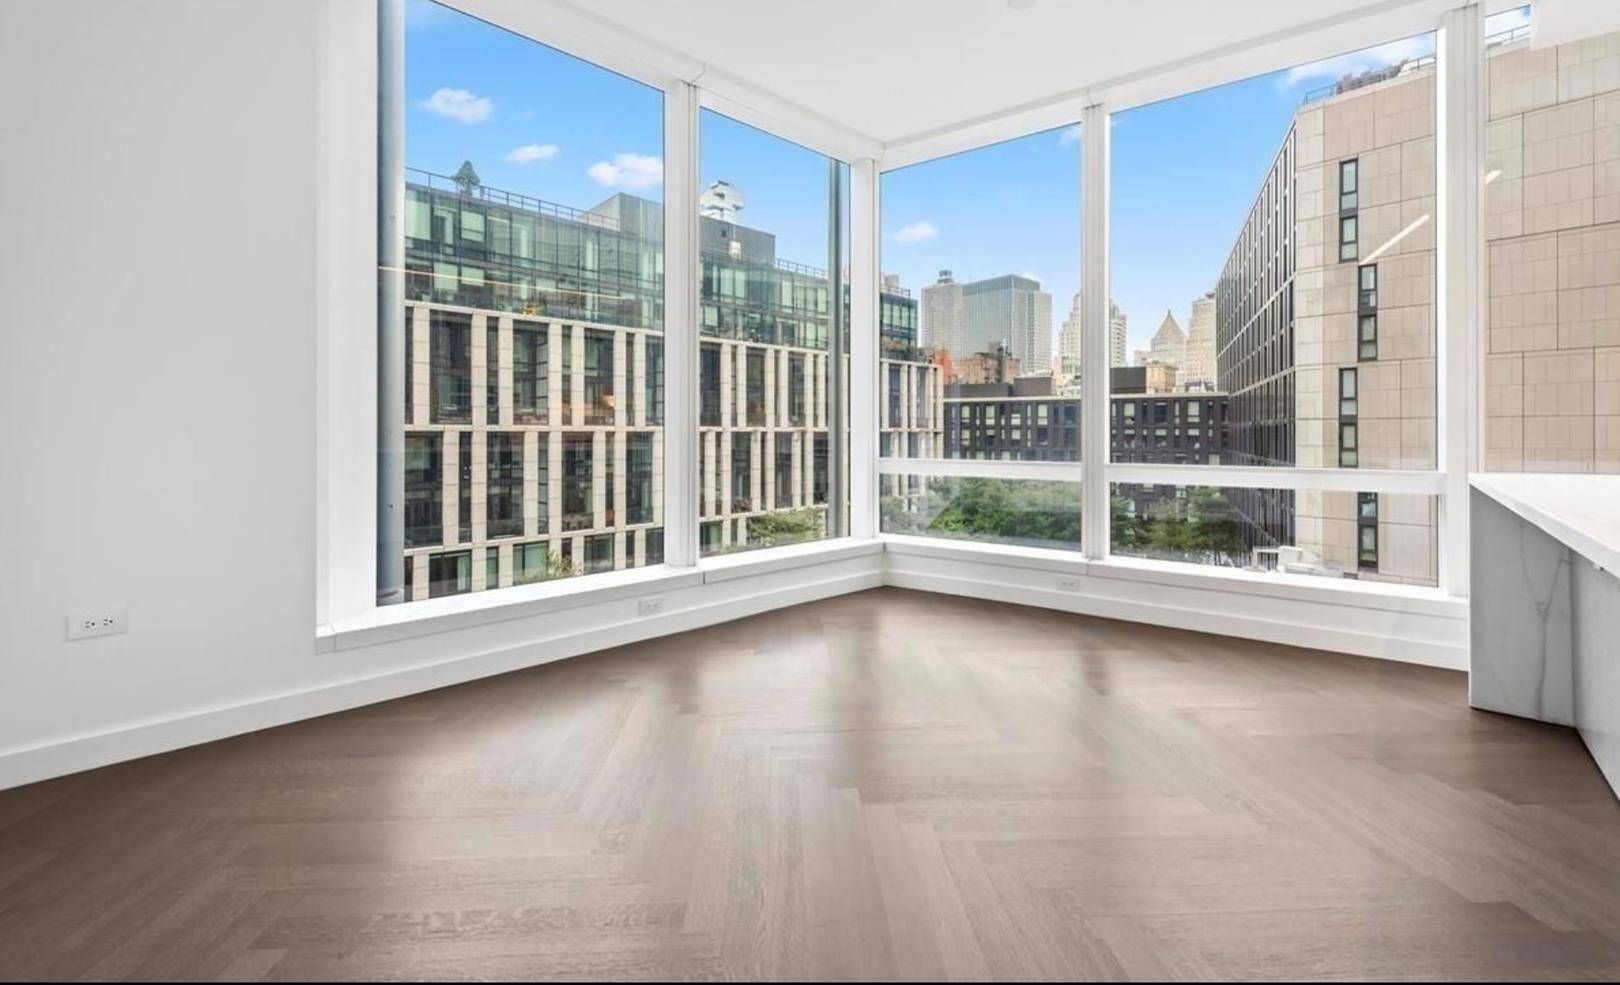 Stunning Northern and Eastern facing walls of glass overlooking the lush landscaping of Edmund Hollander welcome you home to this exquisite 1 bedroom, 1 bathroom luxurious residence.